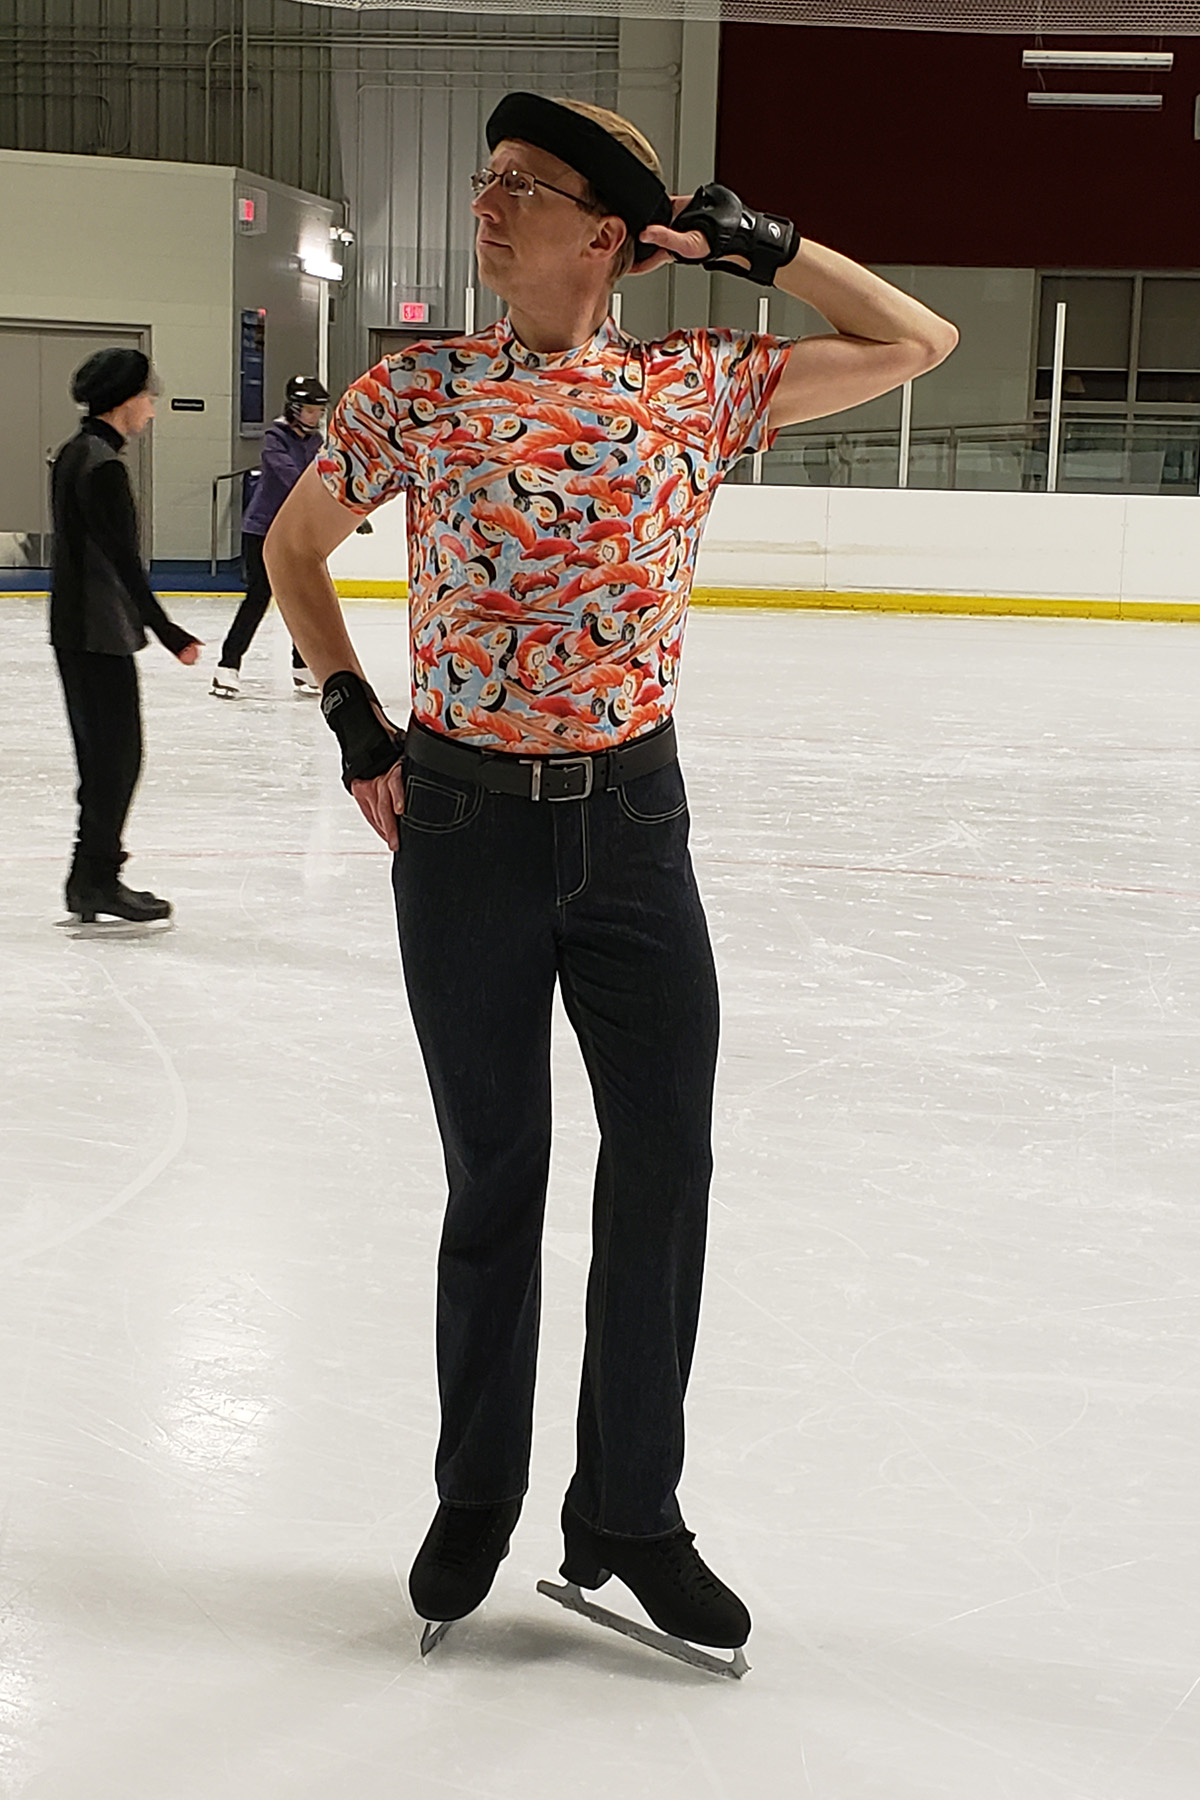 A male ice skater posing on the ice.